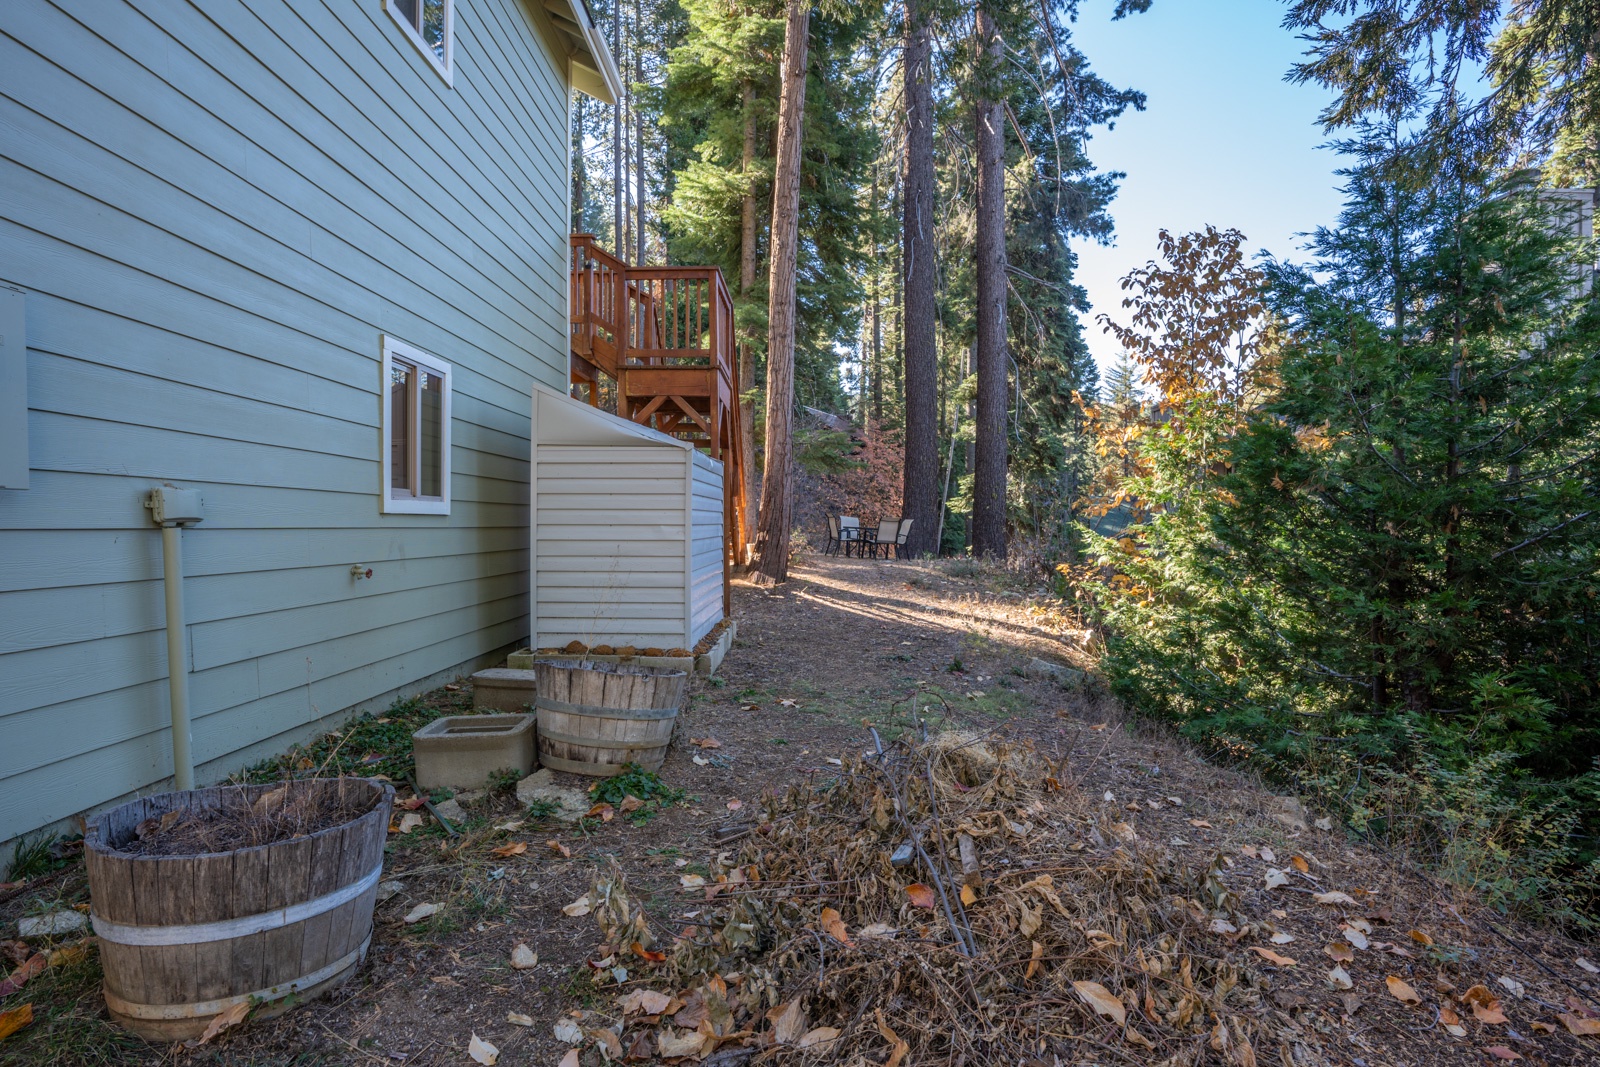 Take in the fresh air & wilderness views in the secluded yard area